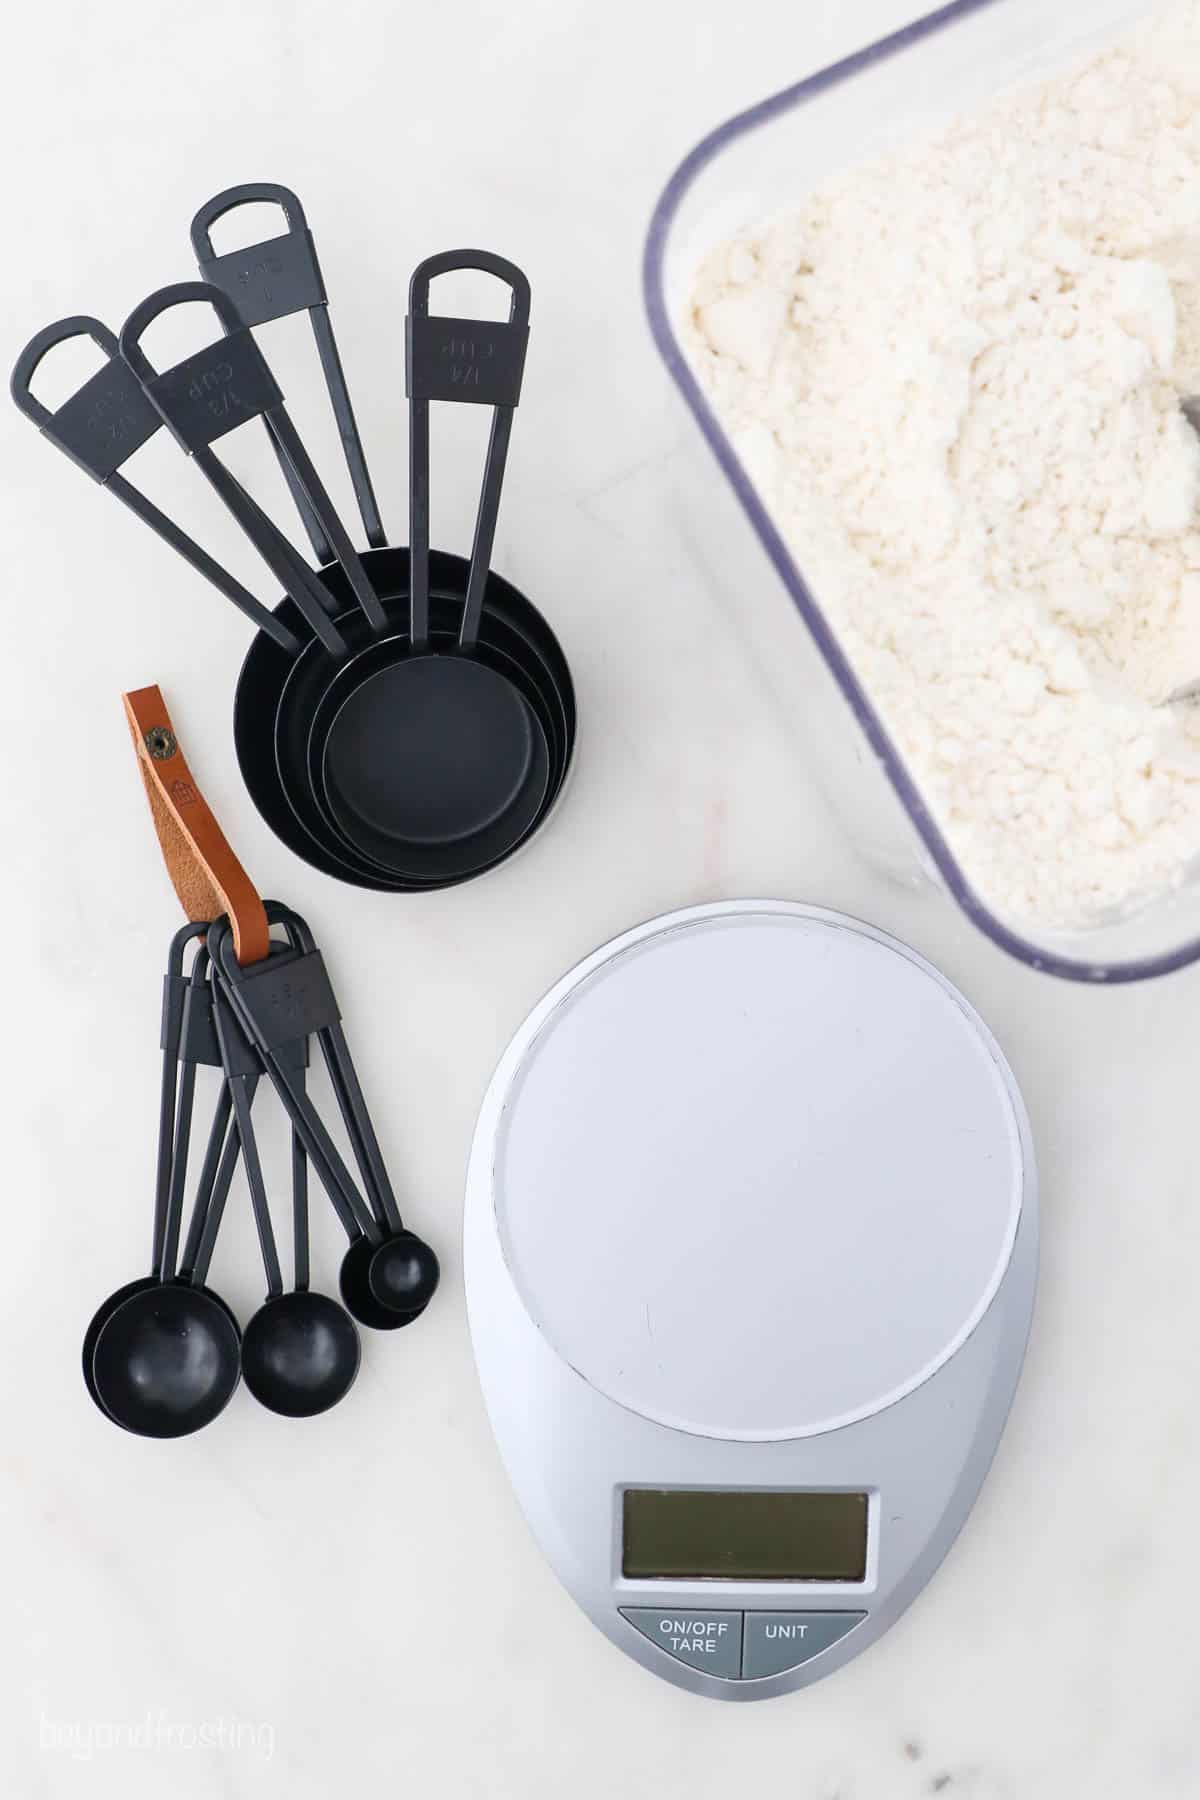 A food scale, a tub of flour, measuring spoons and measuring cups arranged on a marble surface